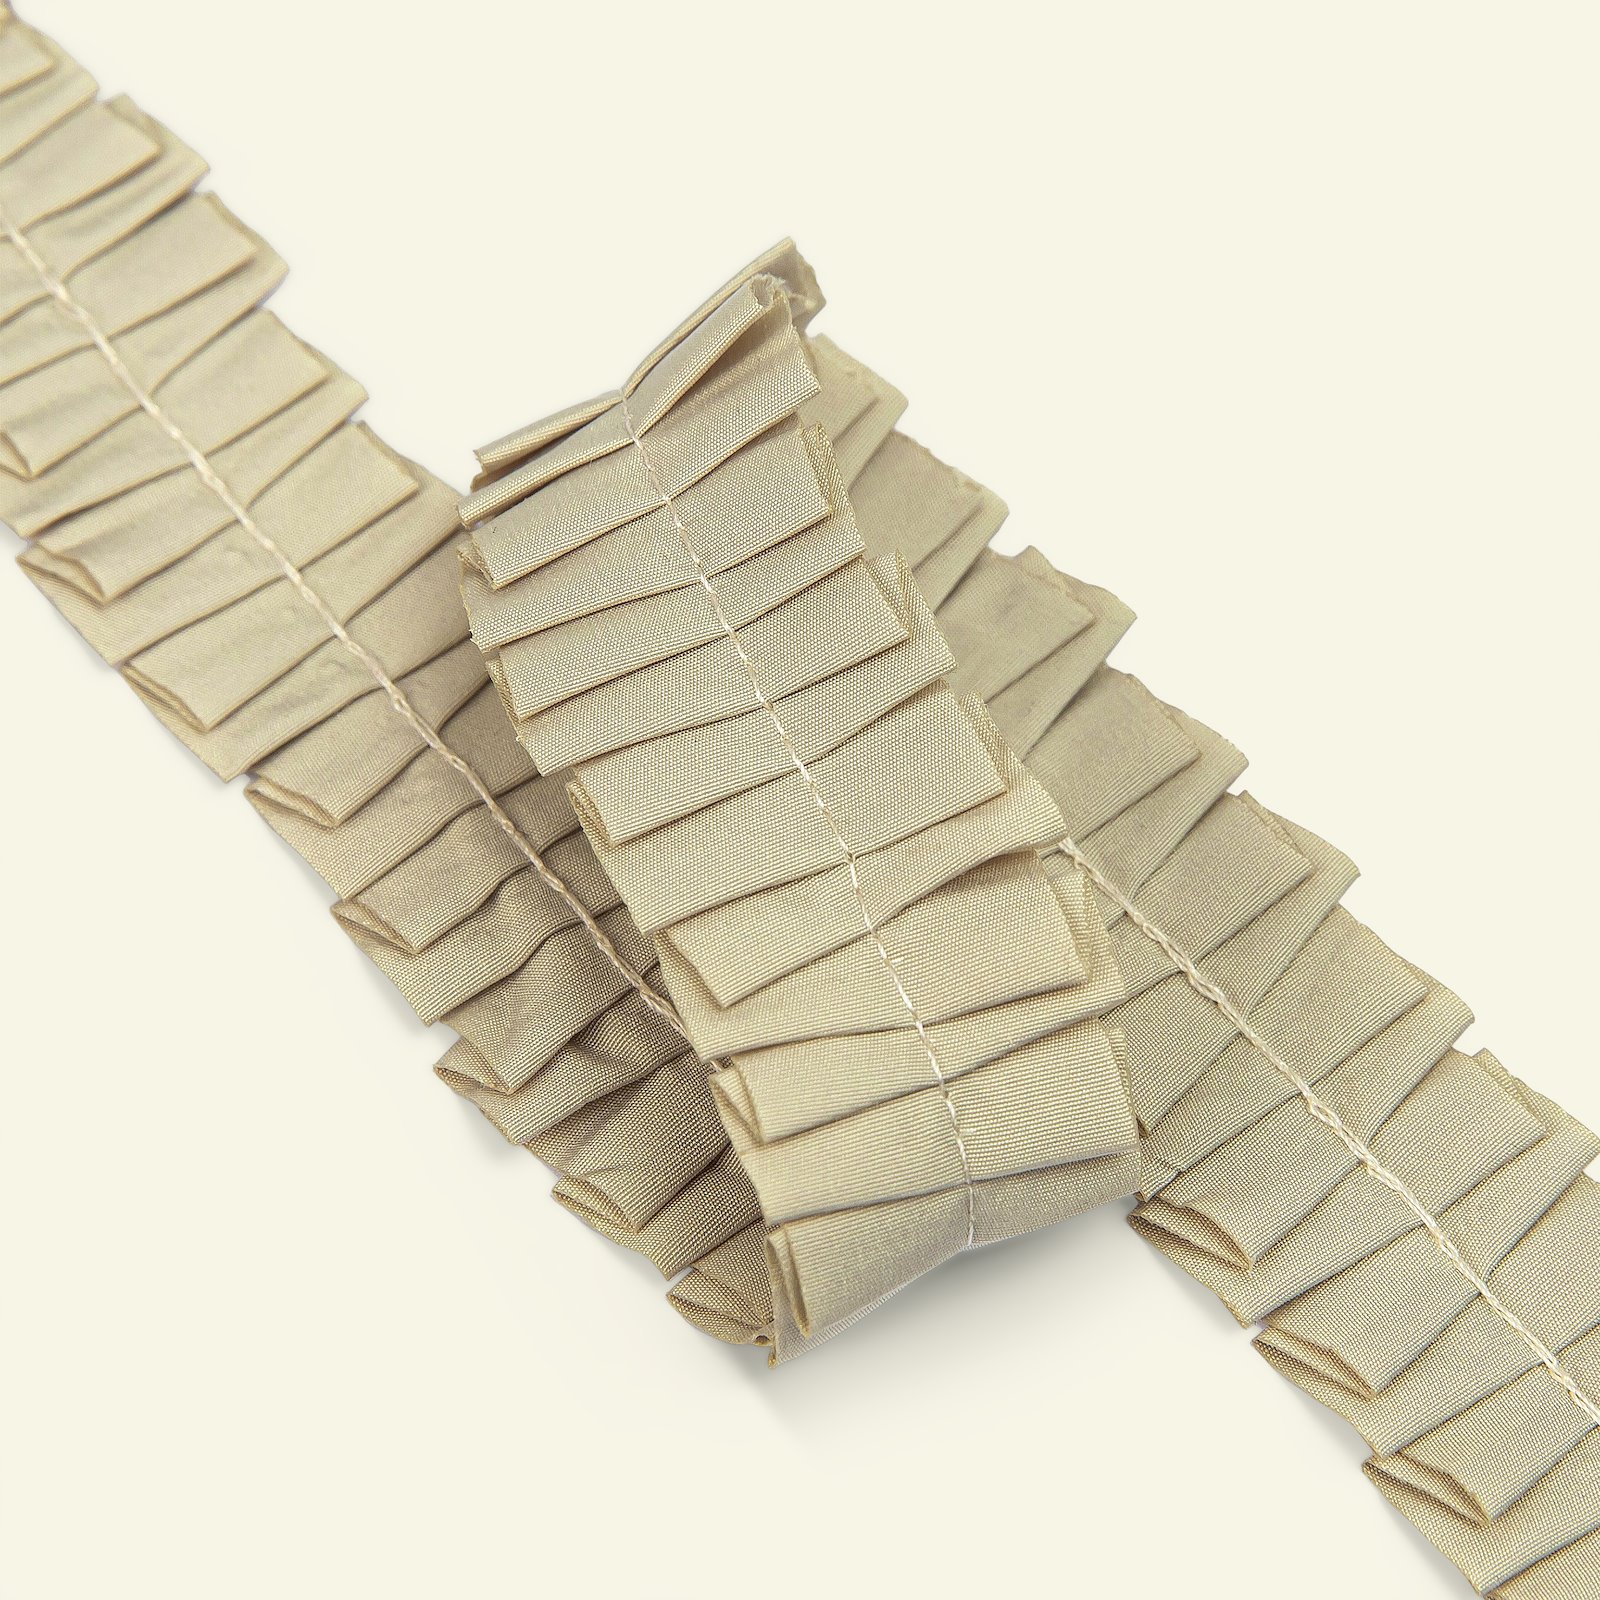 Band volang 25mm beige 2m 21482_pack